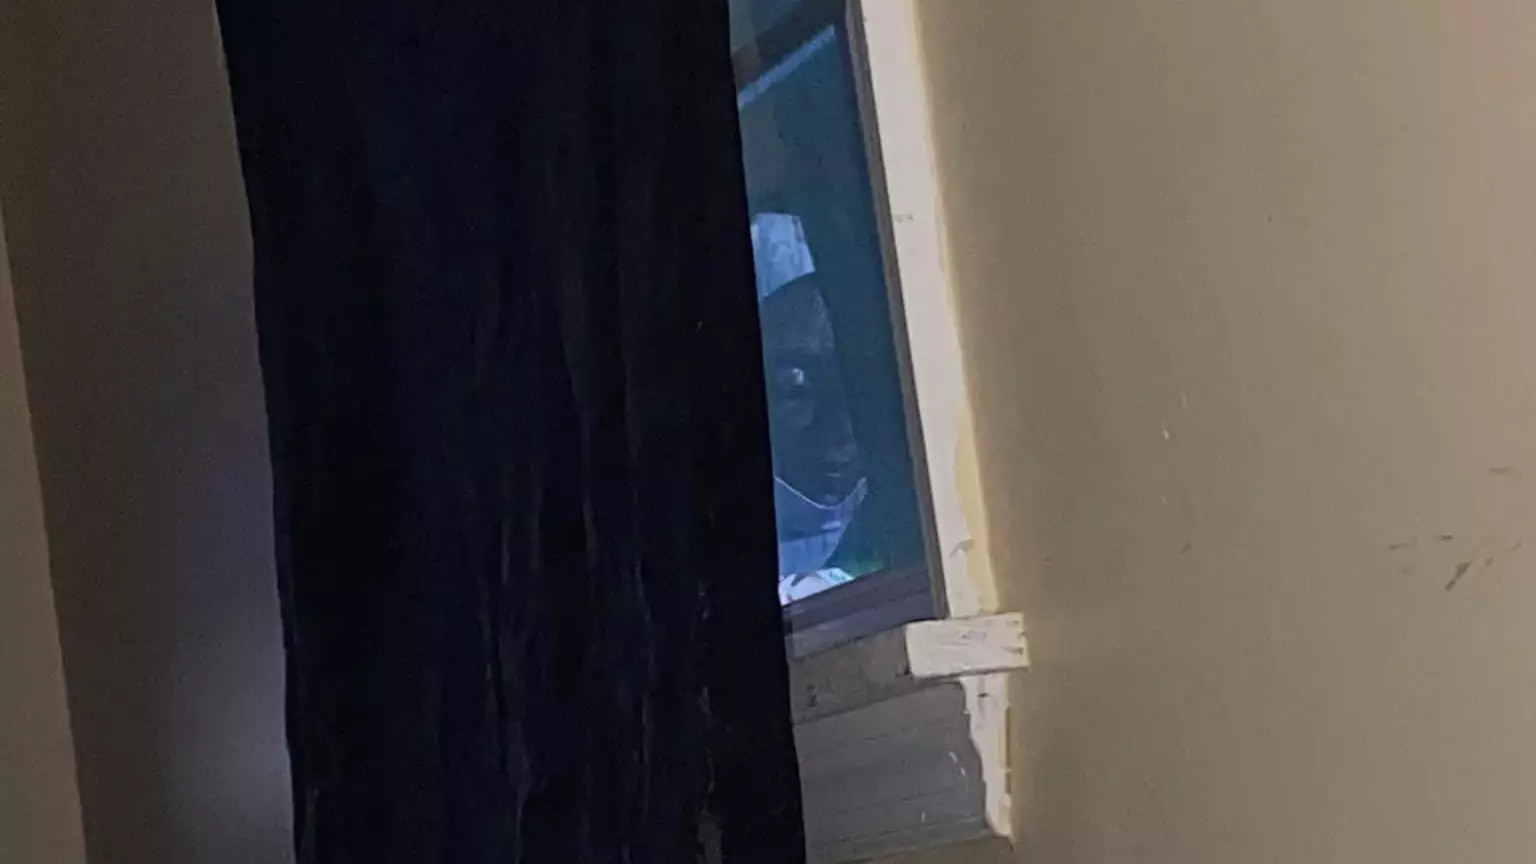 Woman Left Spooked After Seeing 'Haunting' Reflection In Window